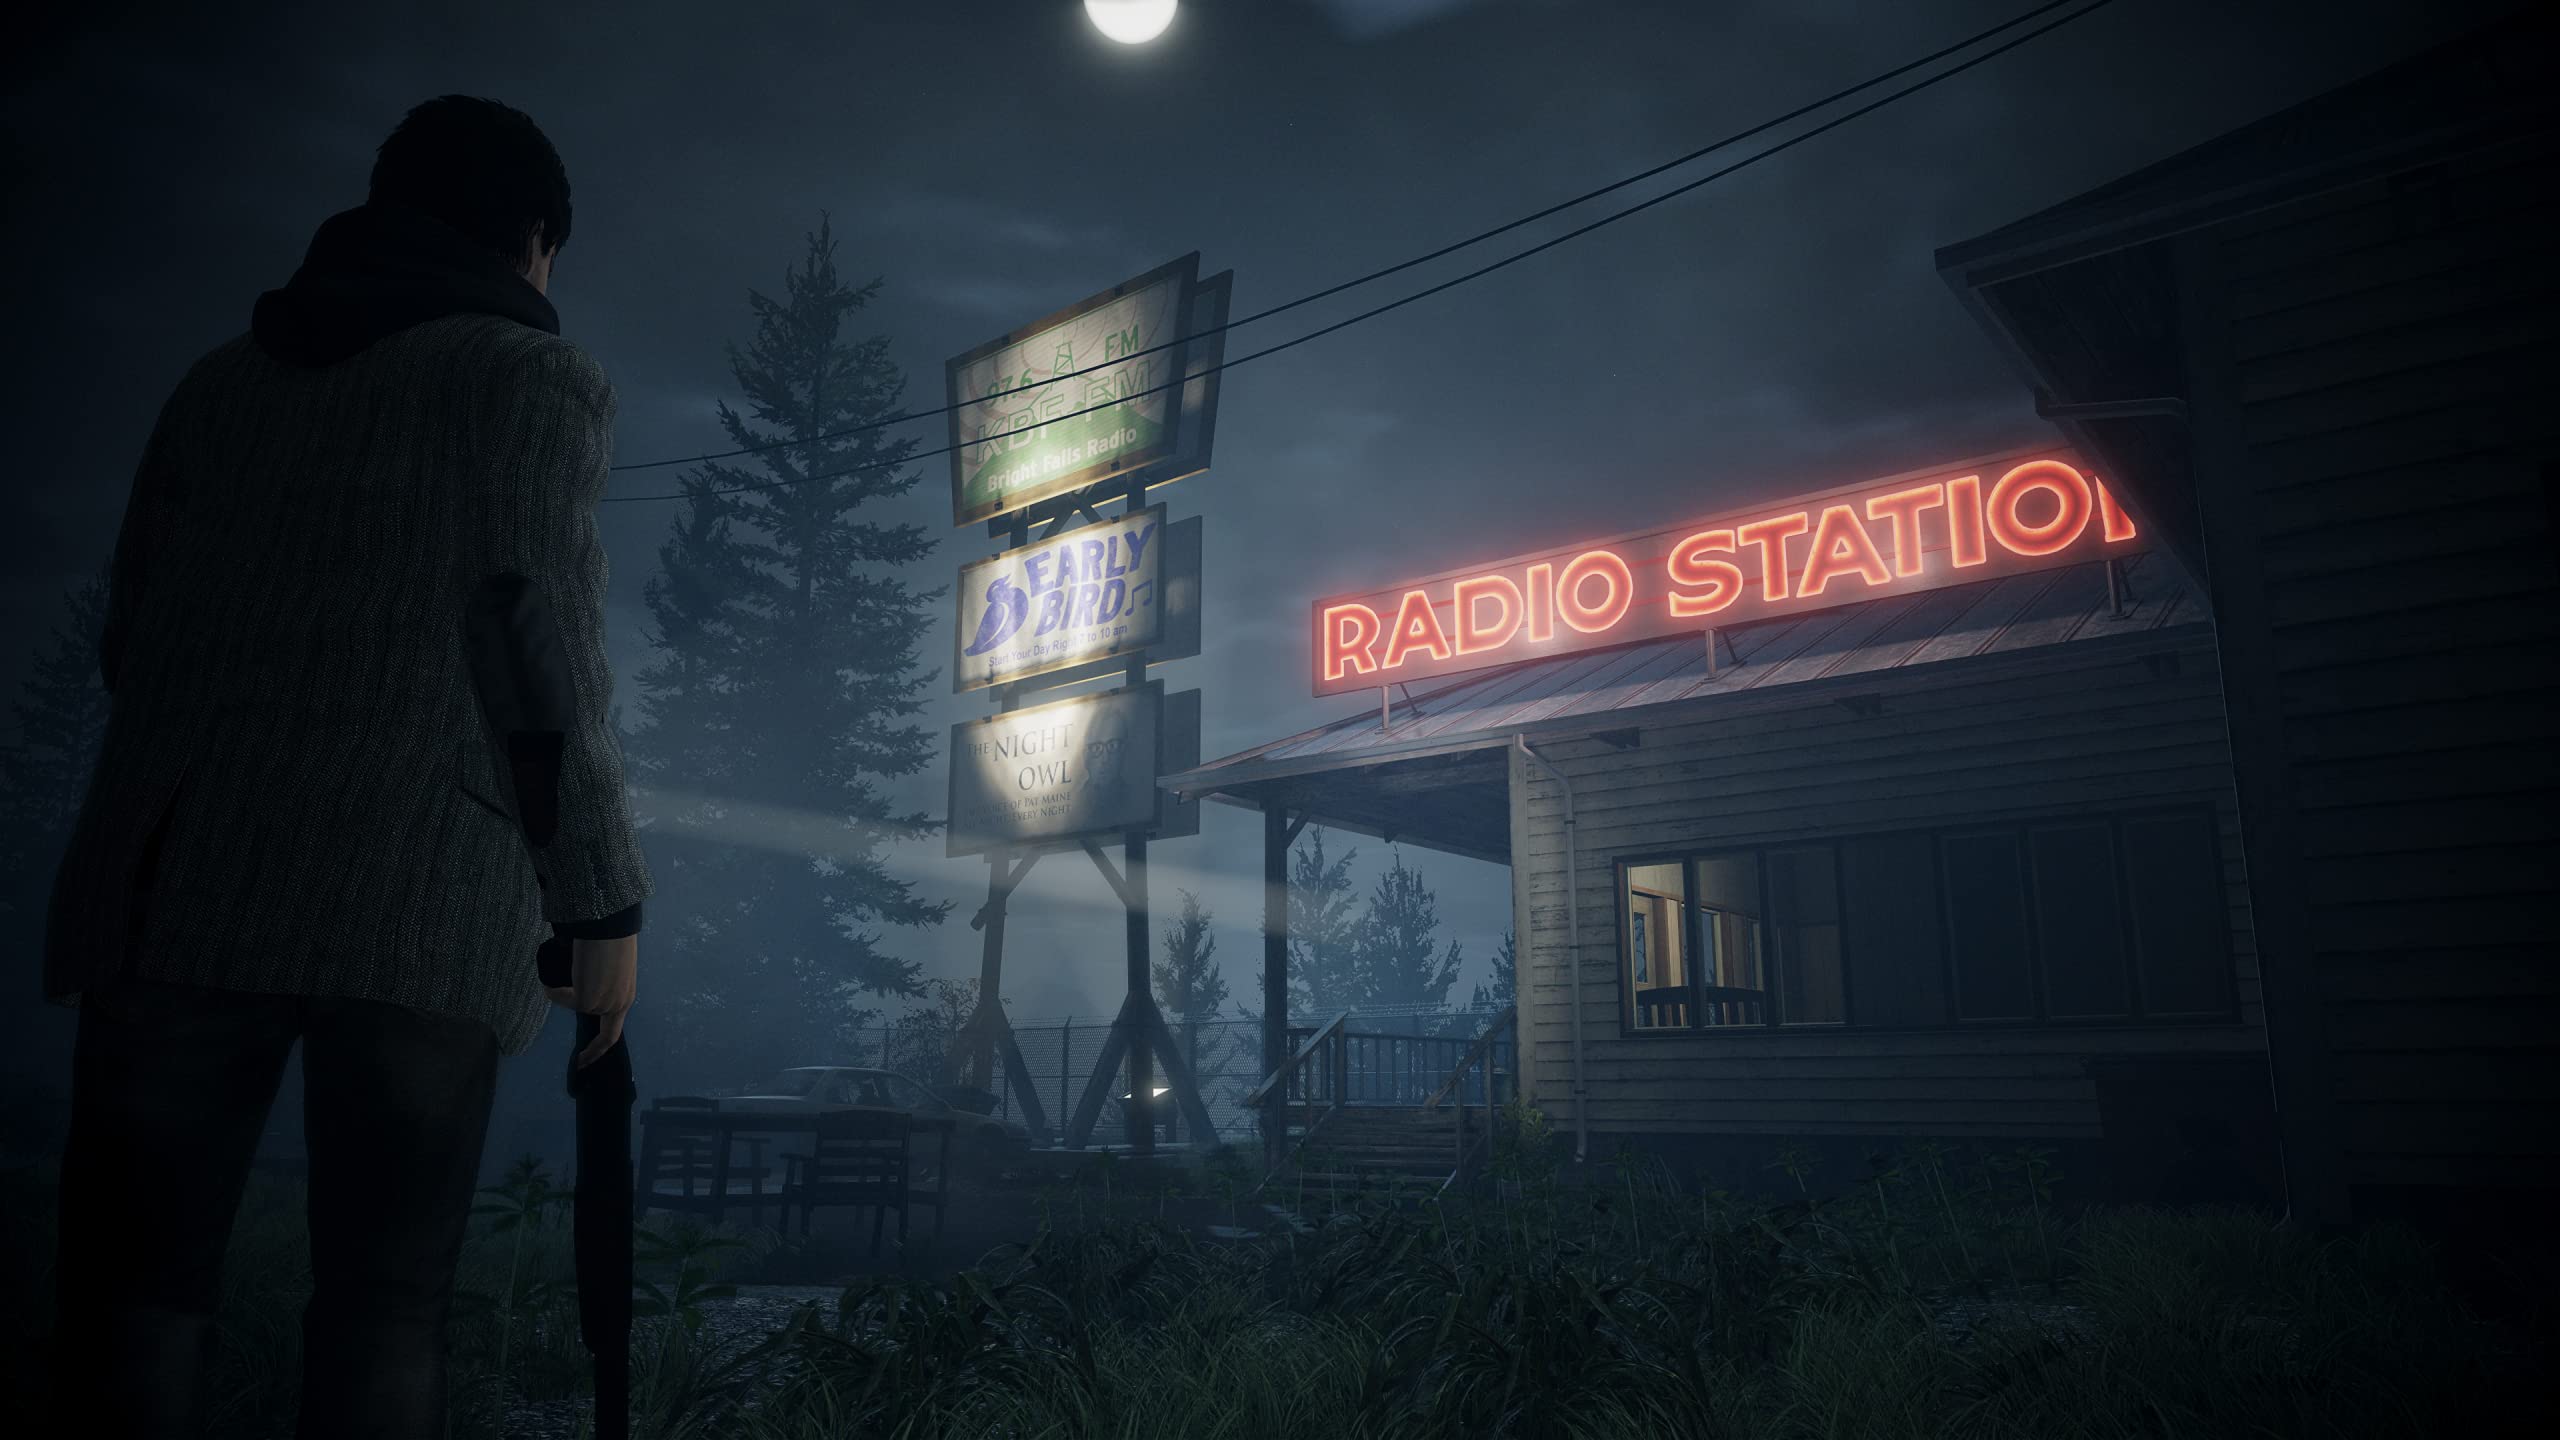 7th September 2021 <br> Announcing Alan Wake Remastered: An Open